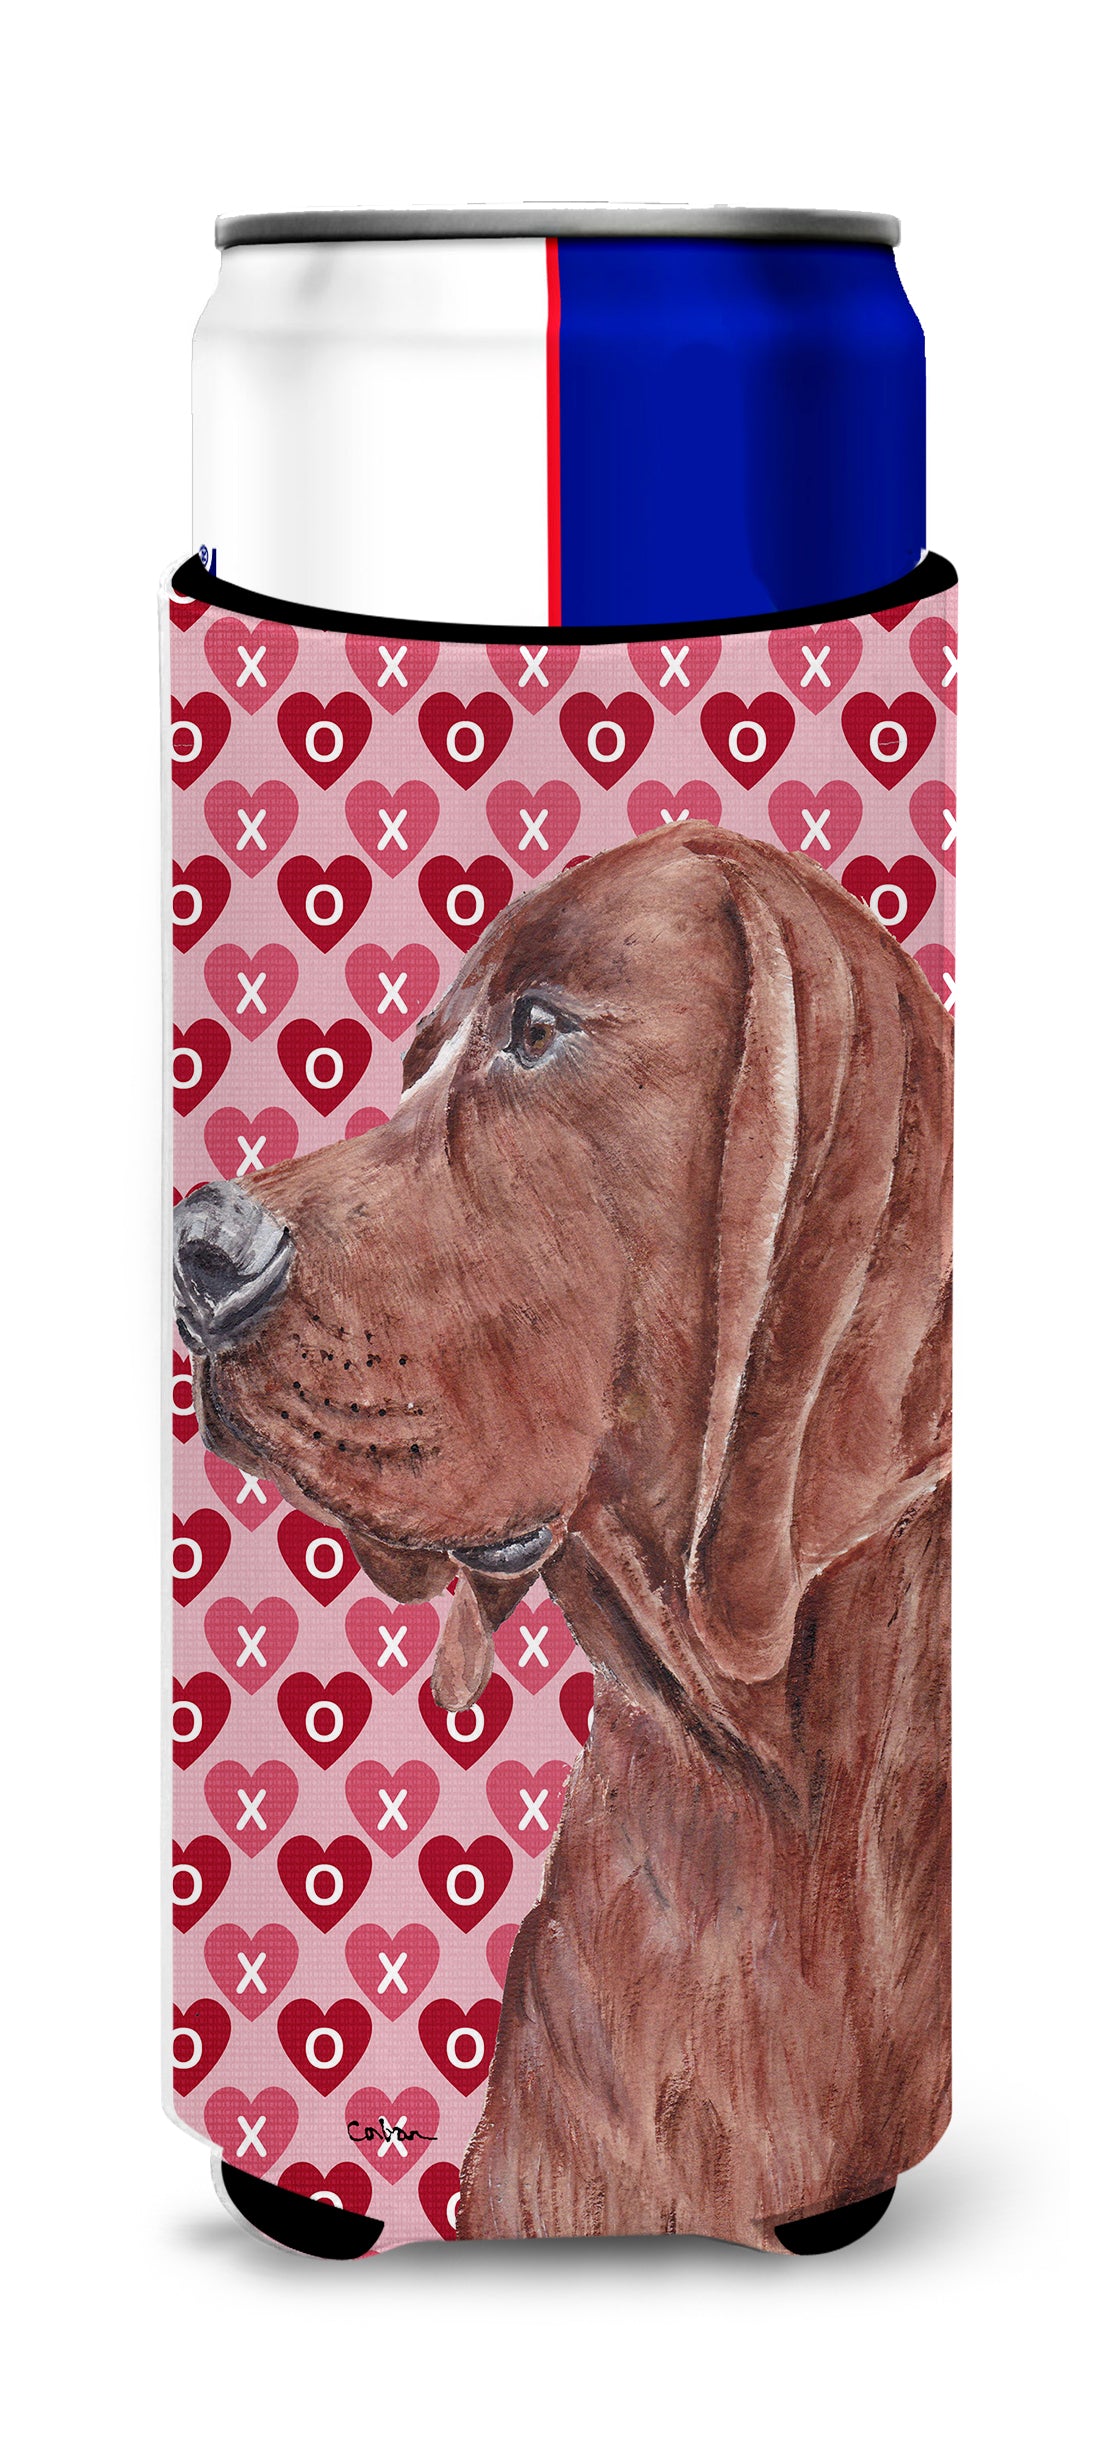 Redbone Coonhound Hearts and Love Ultra Beverage Insulators for slim cans SC9707MUK.